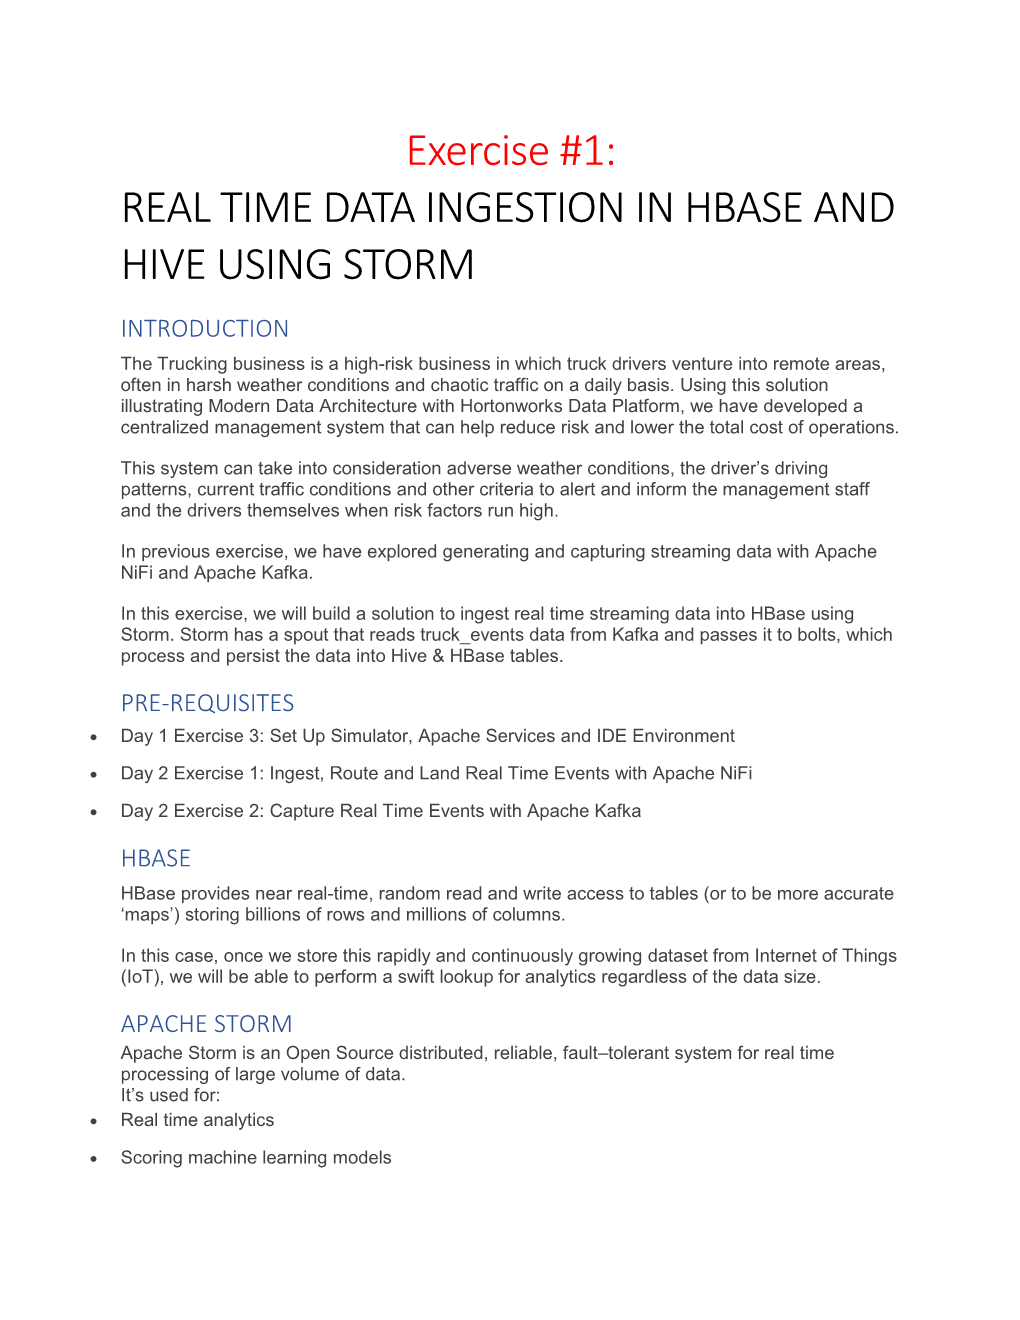 Real Time Data Ingestion in Hbase and Hive Using Storm